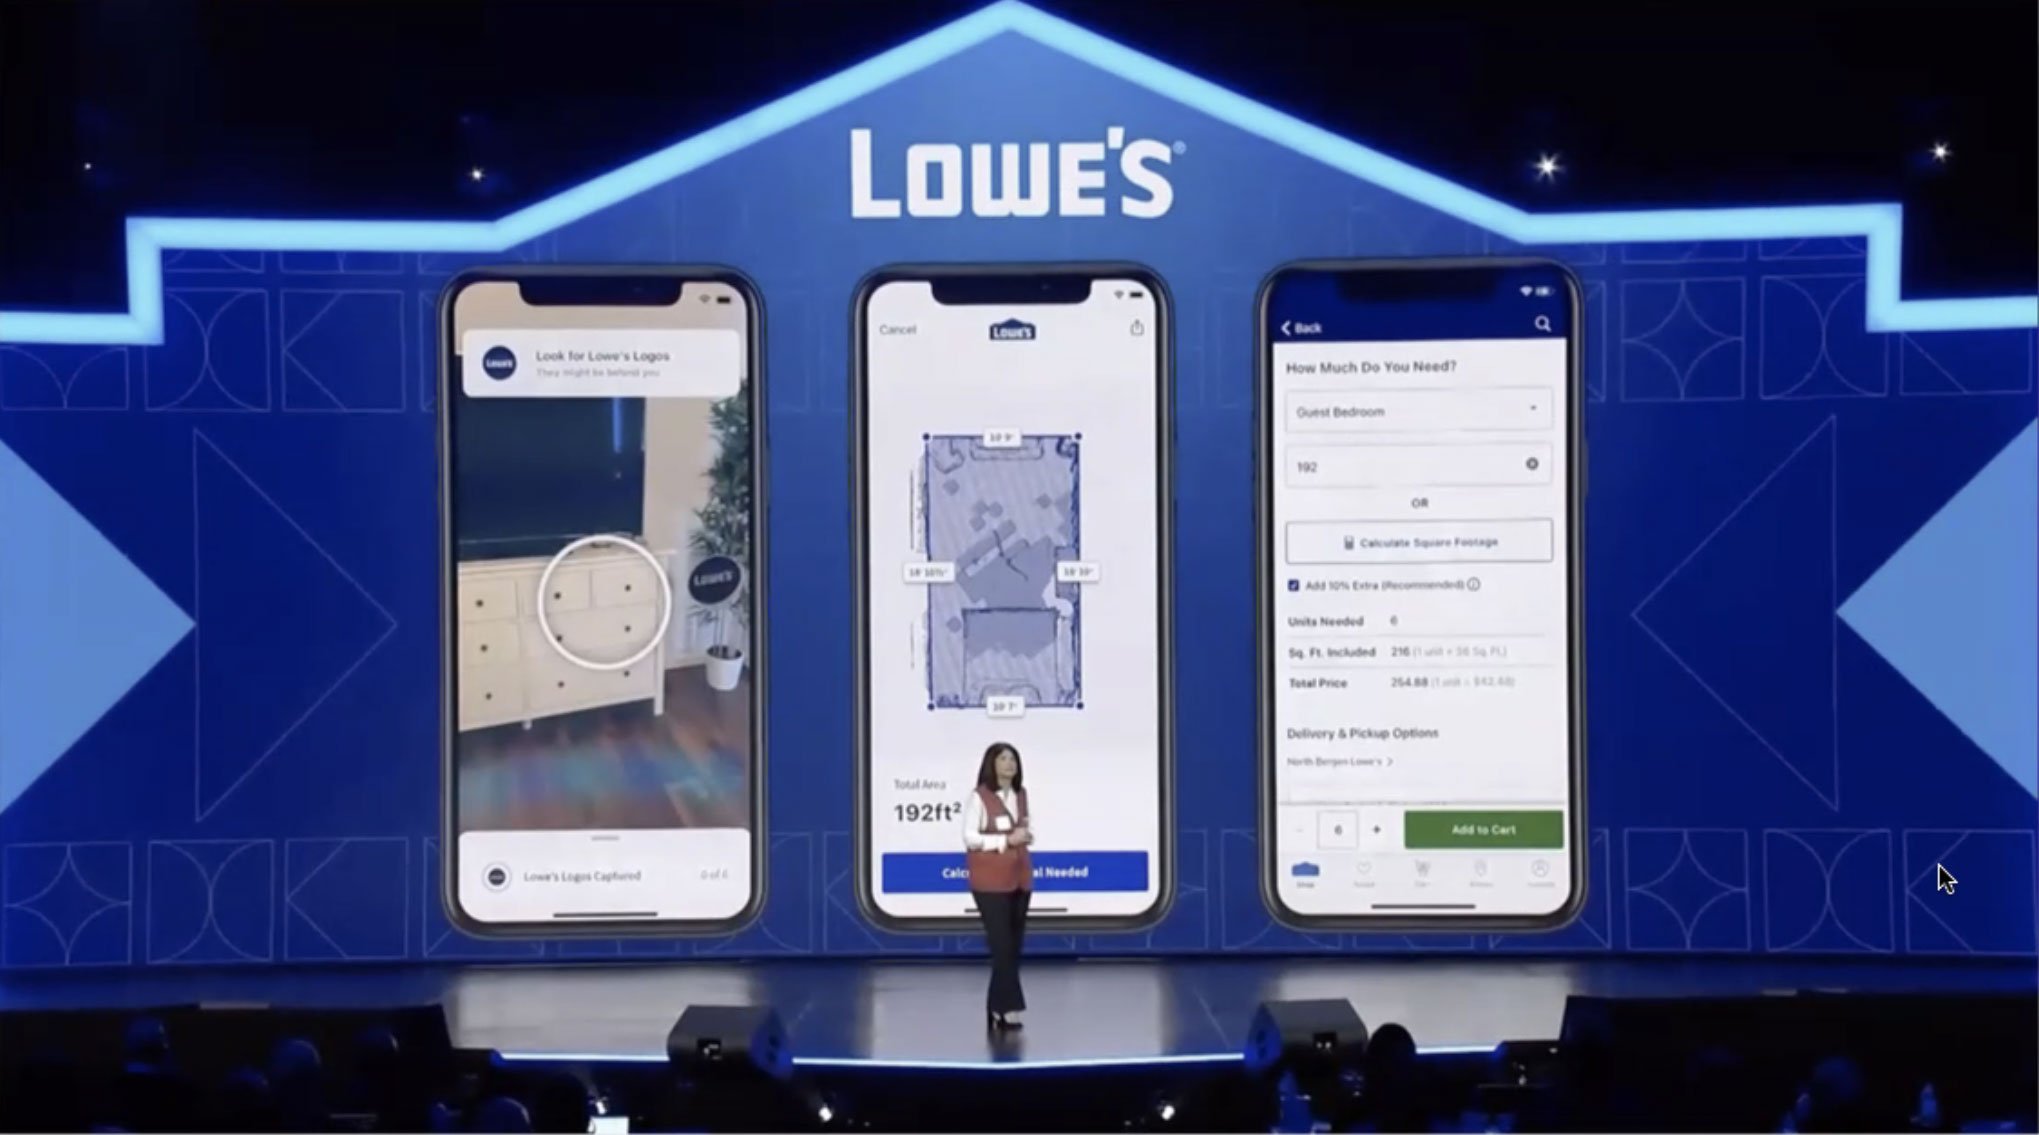 Measure-Your-Space-video-on-stage-at-Lowe's-corporate-event---one-of-two-features-showcased.jpg